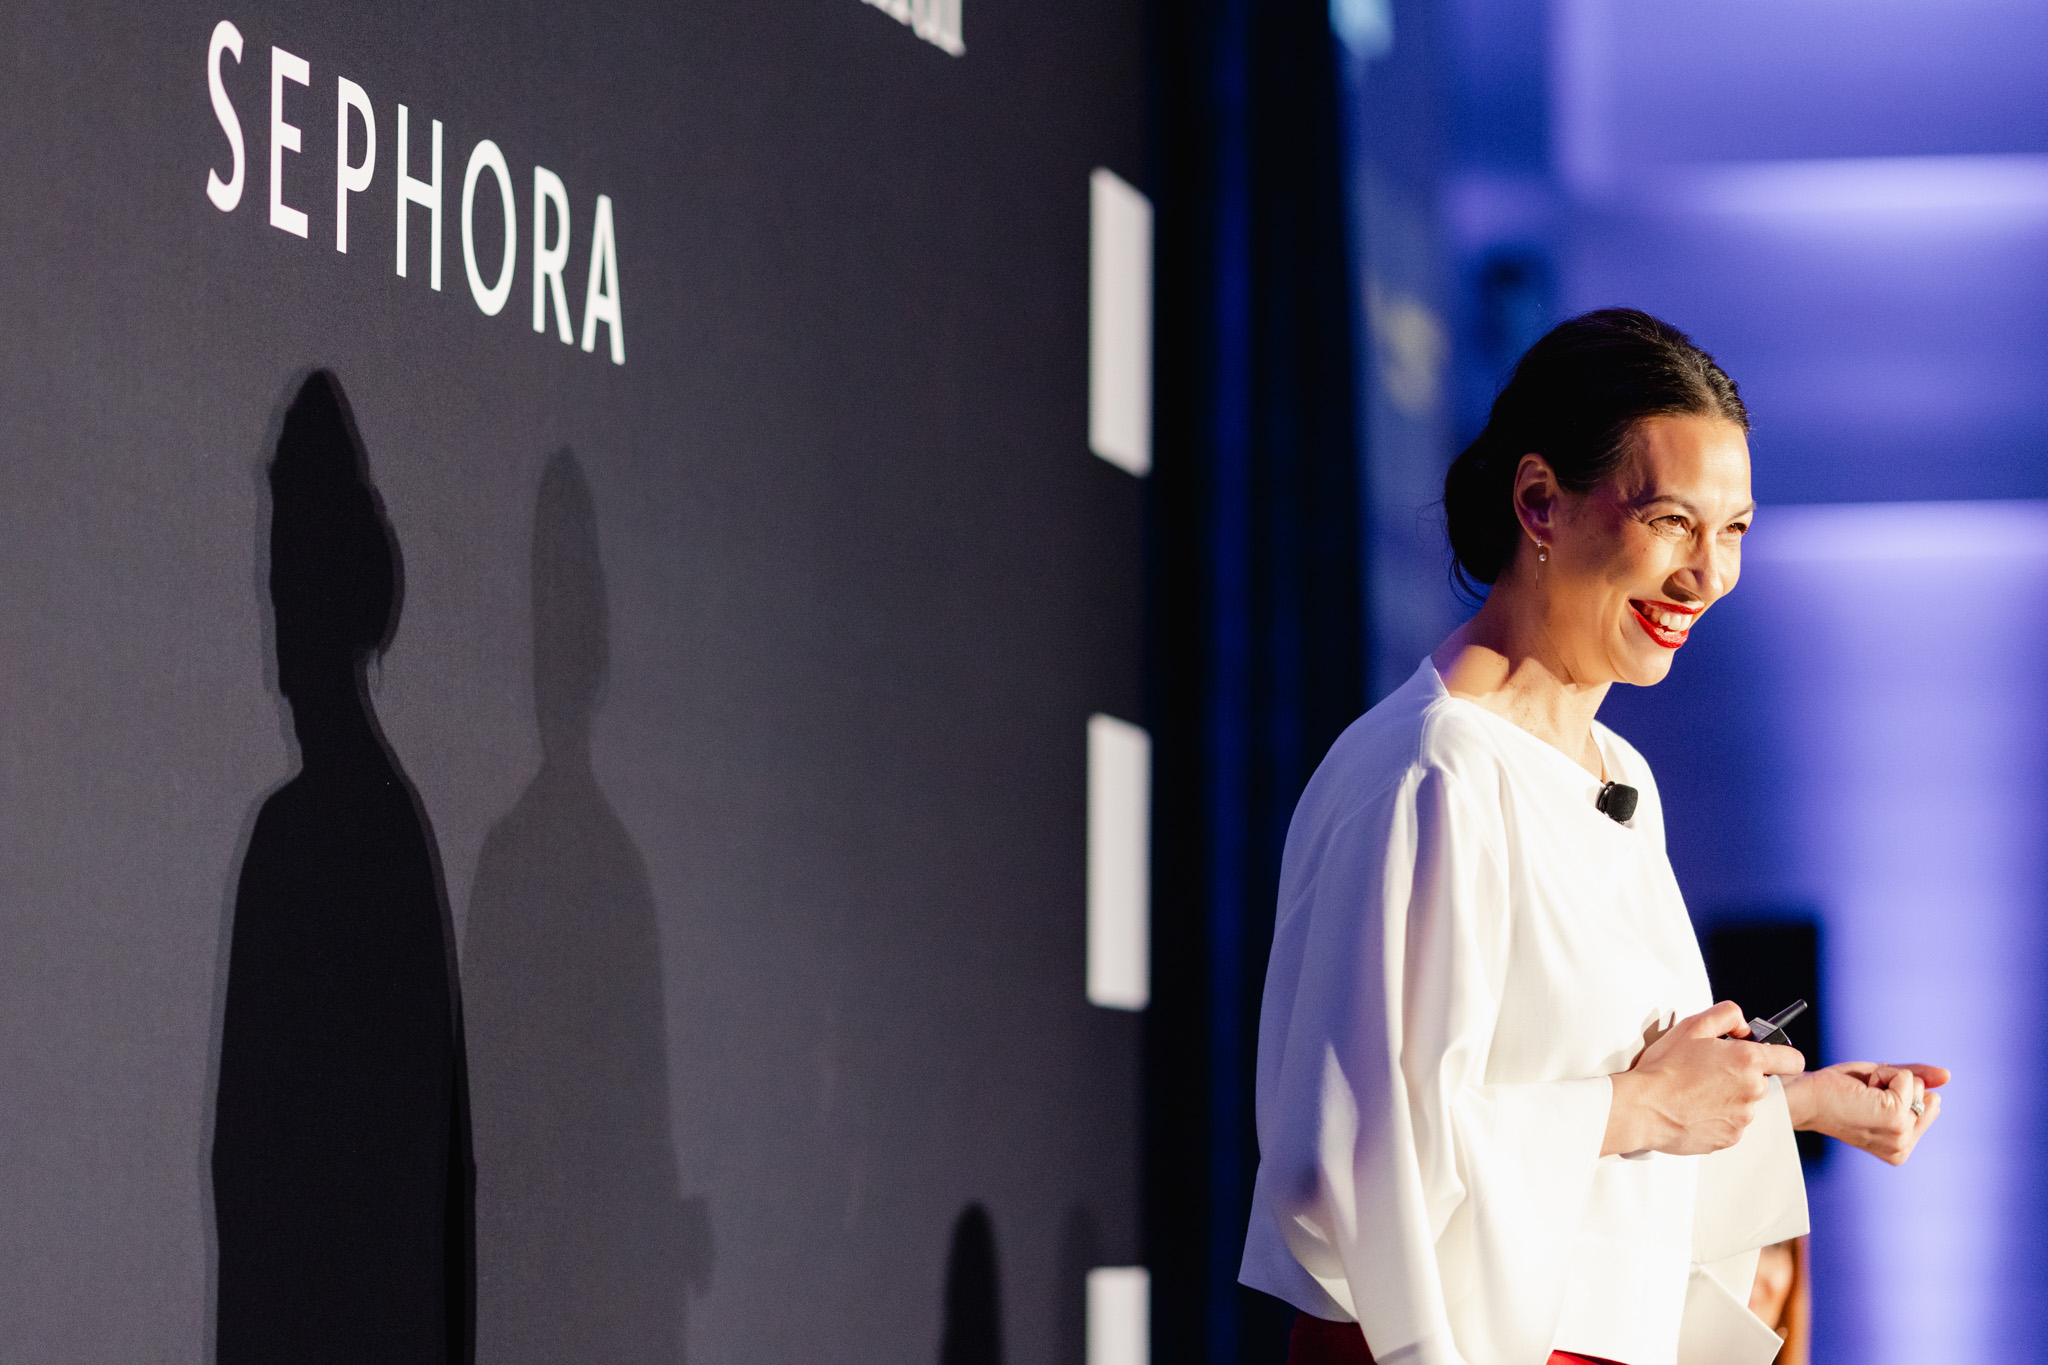 A person stands on stage in front of a Sephora-branded backdrop, smiling and holding a clicker, exemplifying the essence of corporate photography.